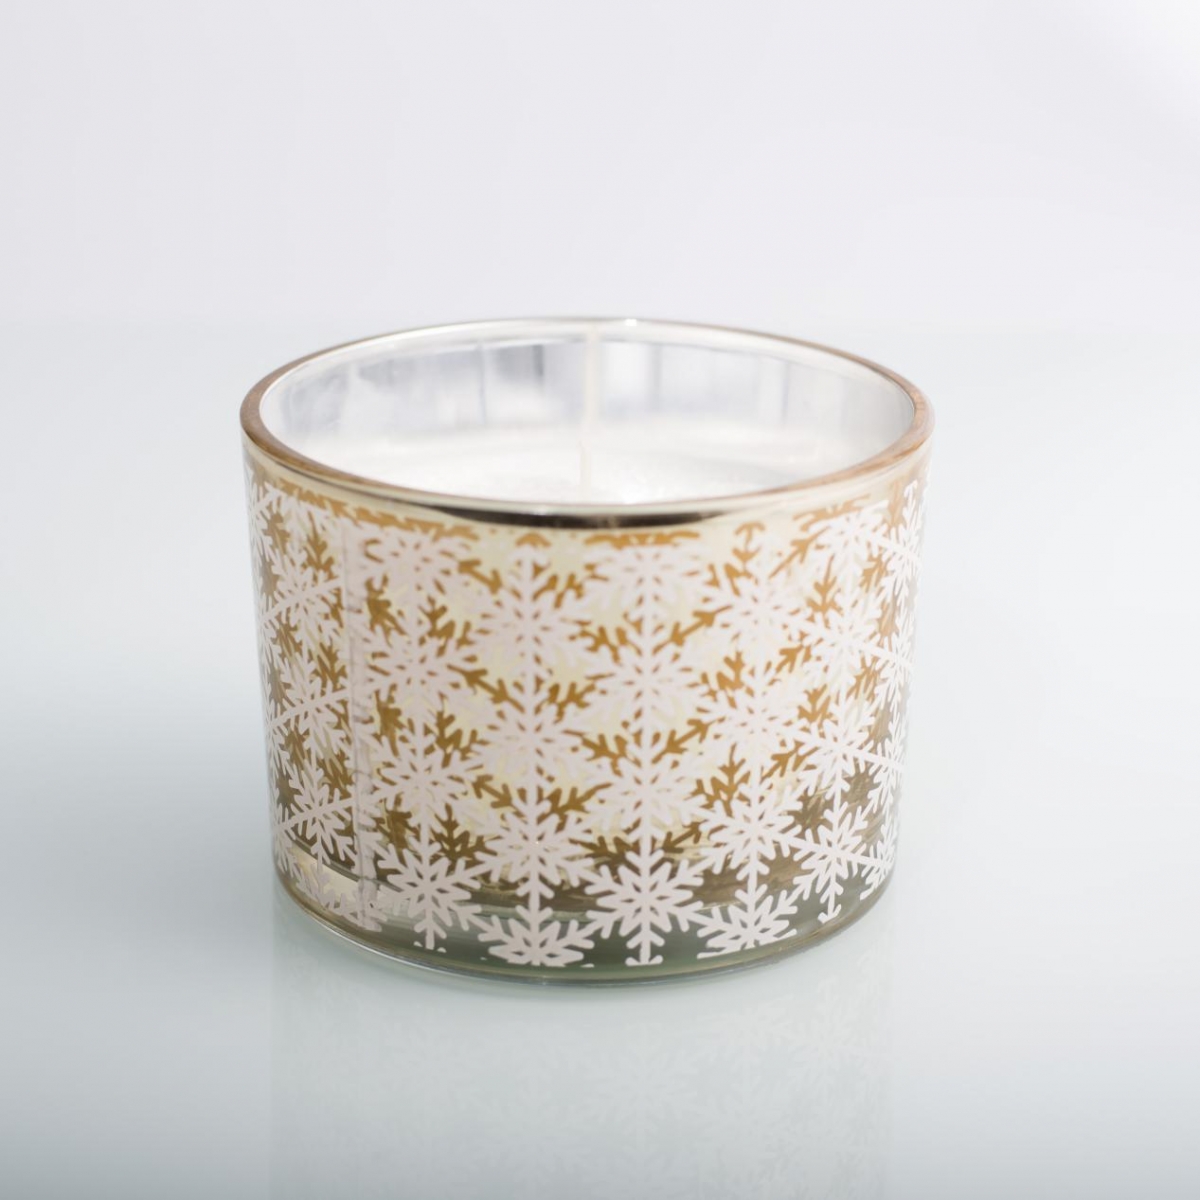 Scented Candles -White Snowflake ,Gold Candle Jar ,Big Christmas Candles ,China Factory ,Price-HOWCANDLE-Candles,Scented Candles,Aromatherapy Candles,Soy Candles,Vegan Candles,Jar Candles,Pillar Candles,Candle Gift Sets,Essential Oils,Reed Diffuser,Candle Holder,